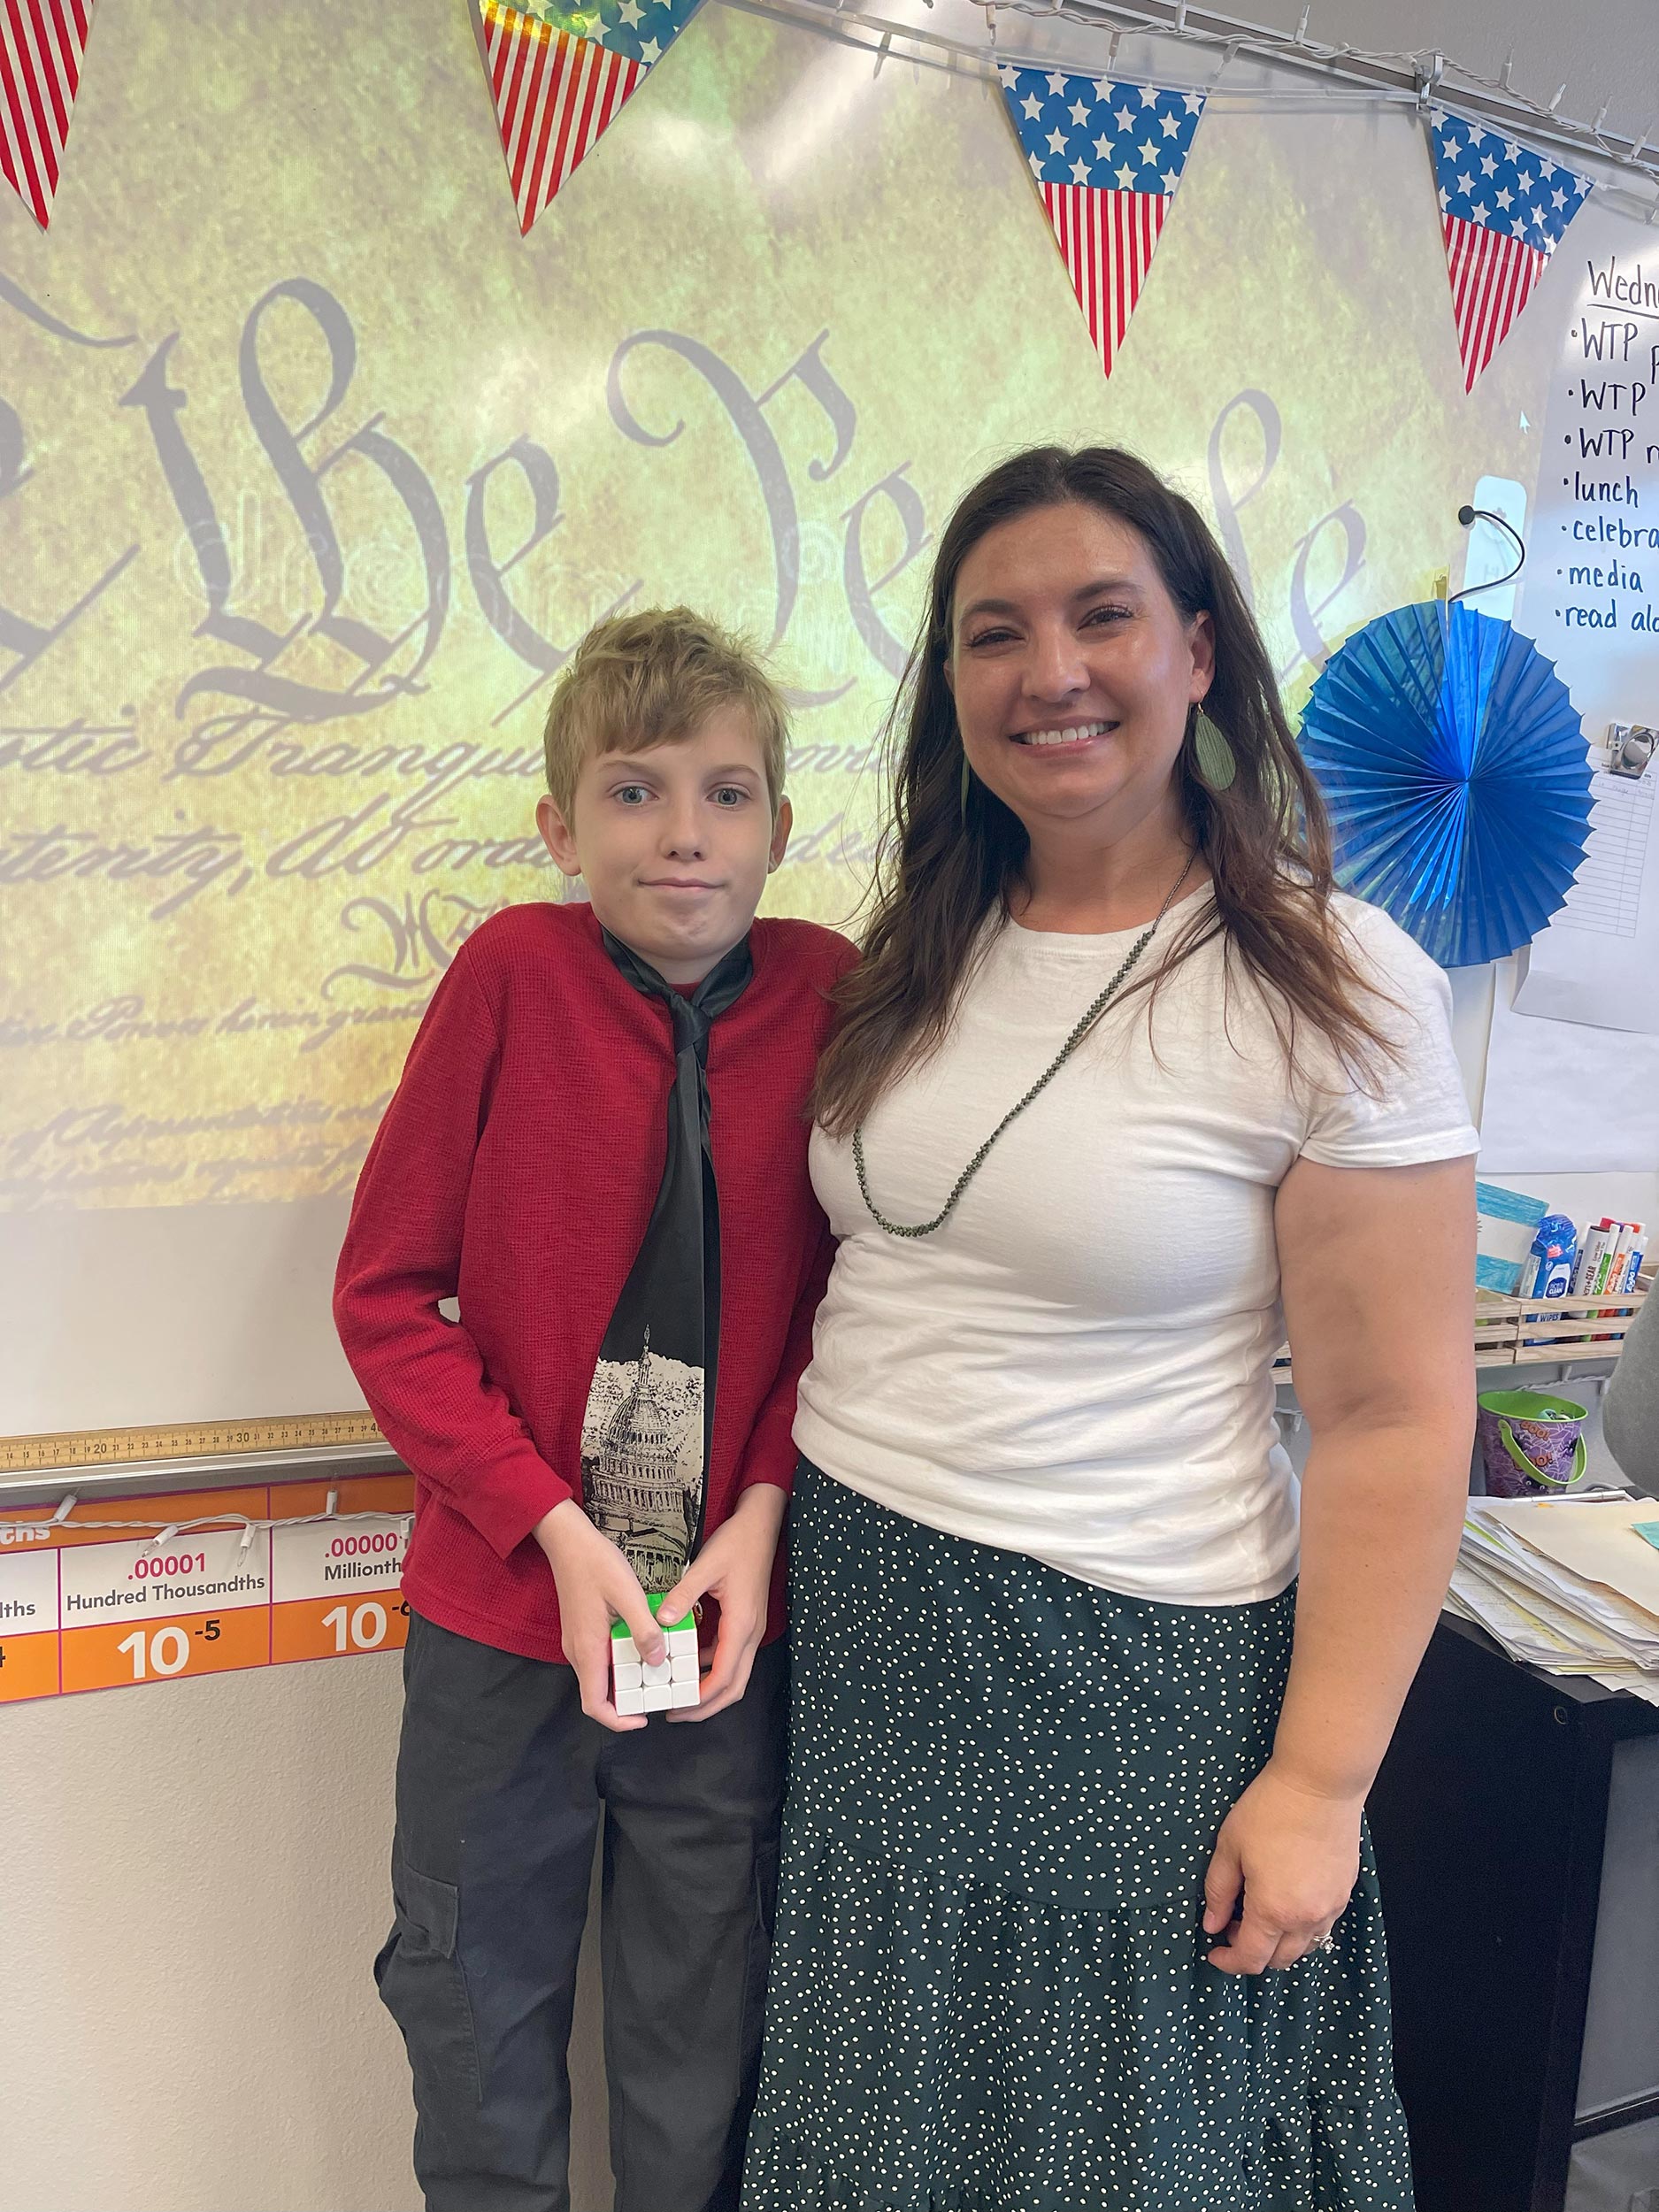 Christine Hull and her son, Nolan, at Doral Academy participating in the We The People: The Citizen and the Constitution program